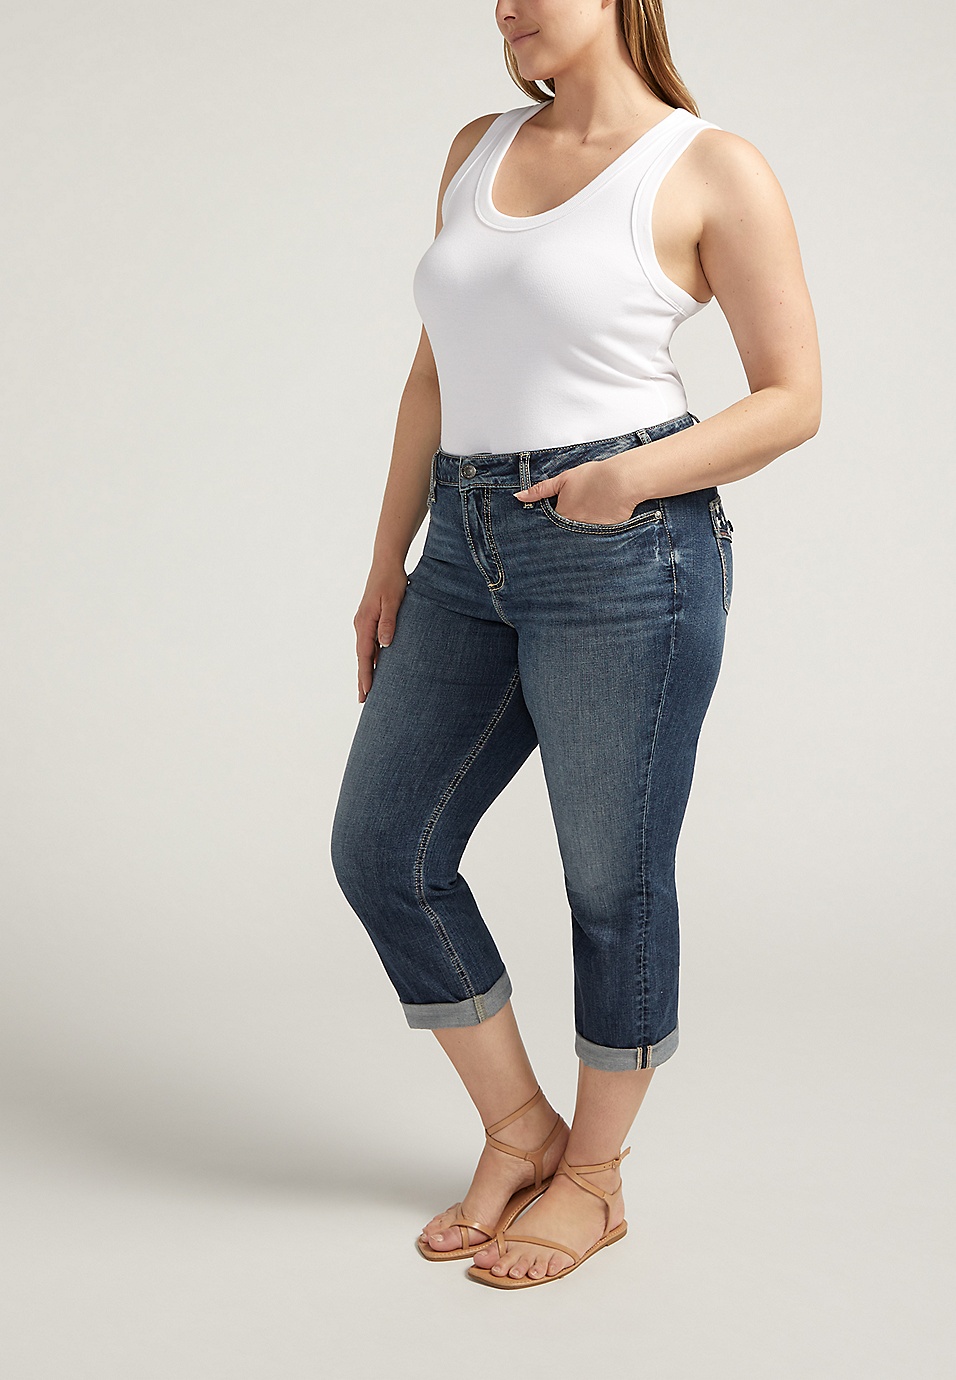 Silver Jeans Co.® Suki Curvy Mid Rise Luxe Stretch Americana Cropped Jean